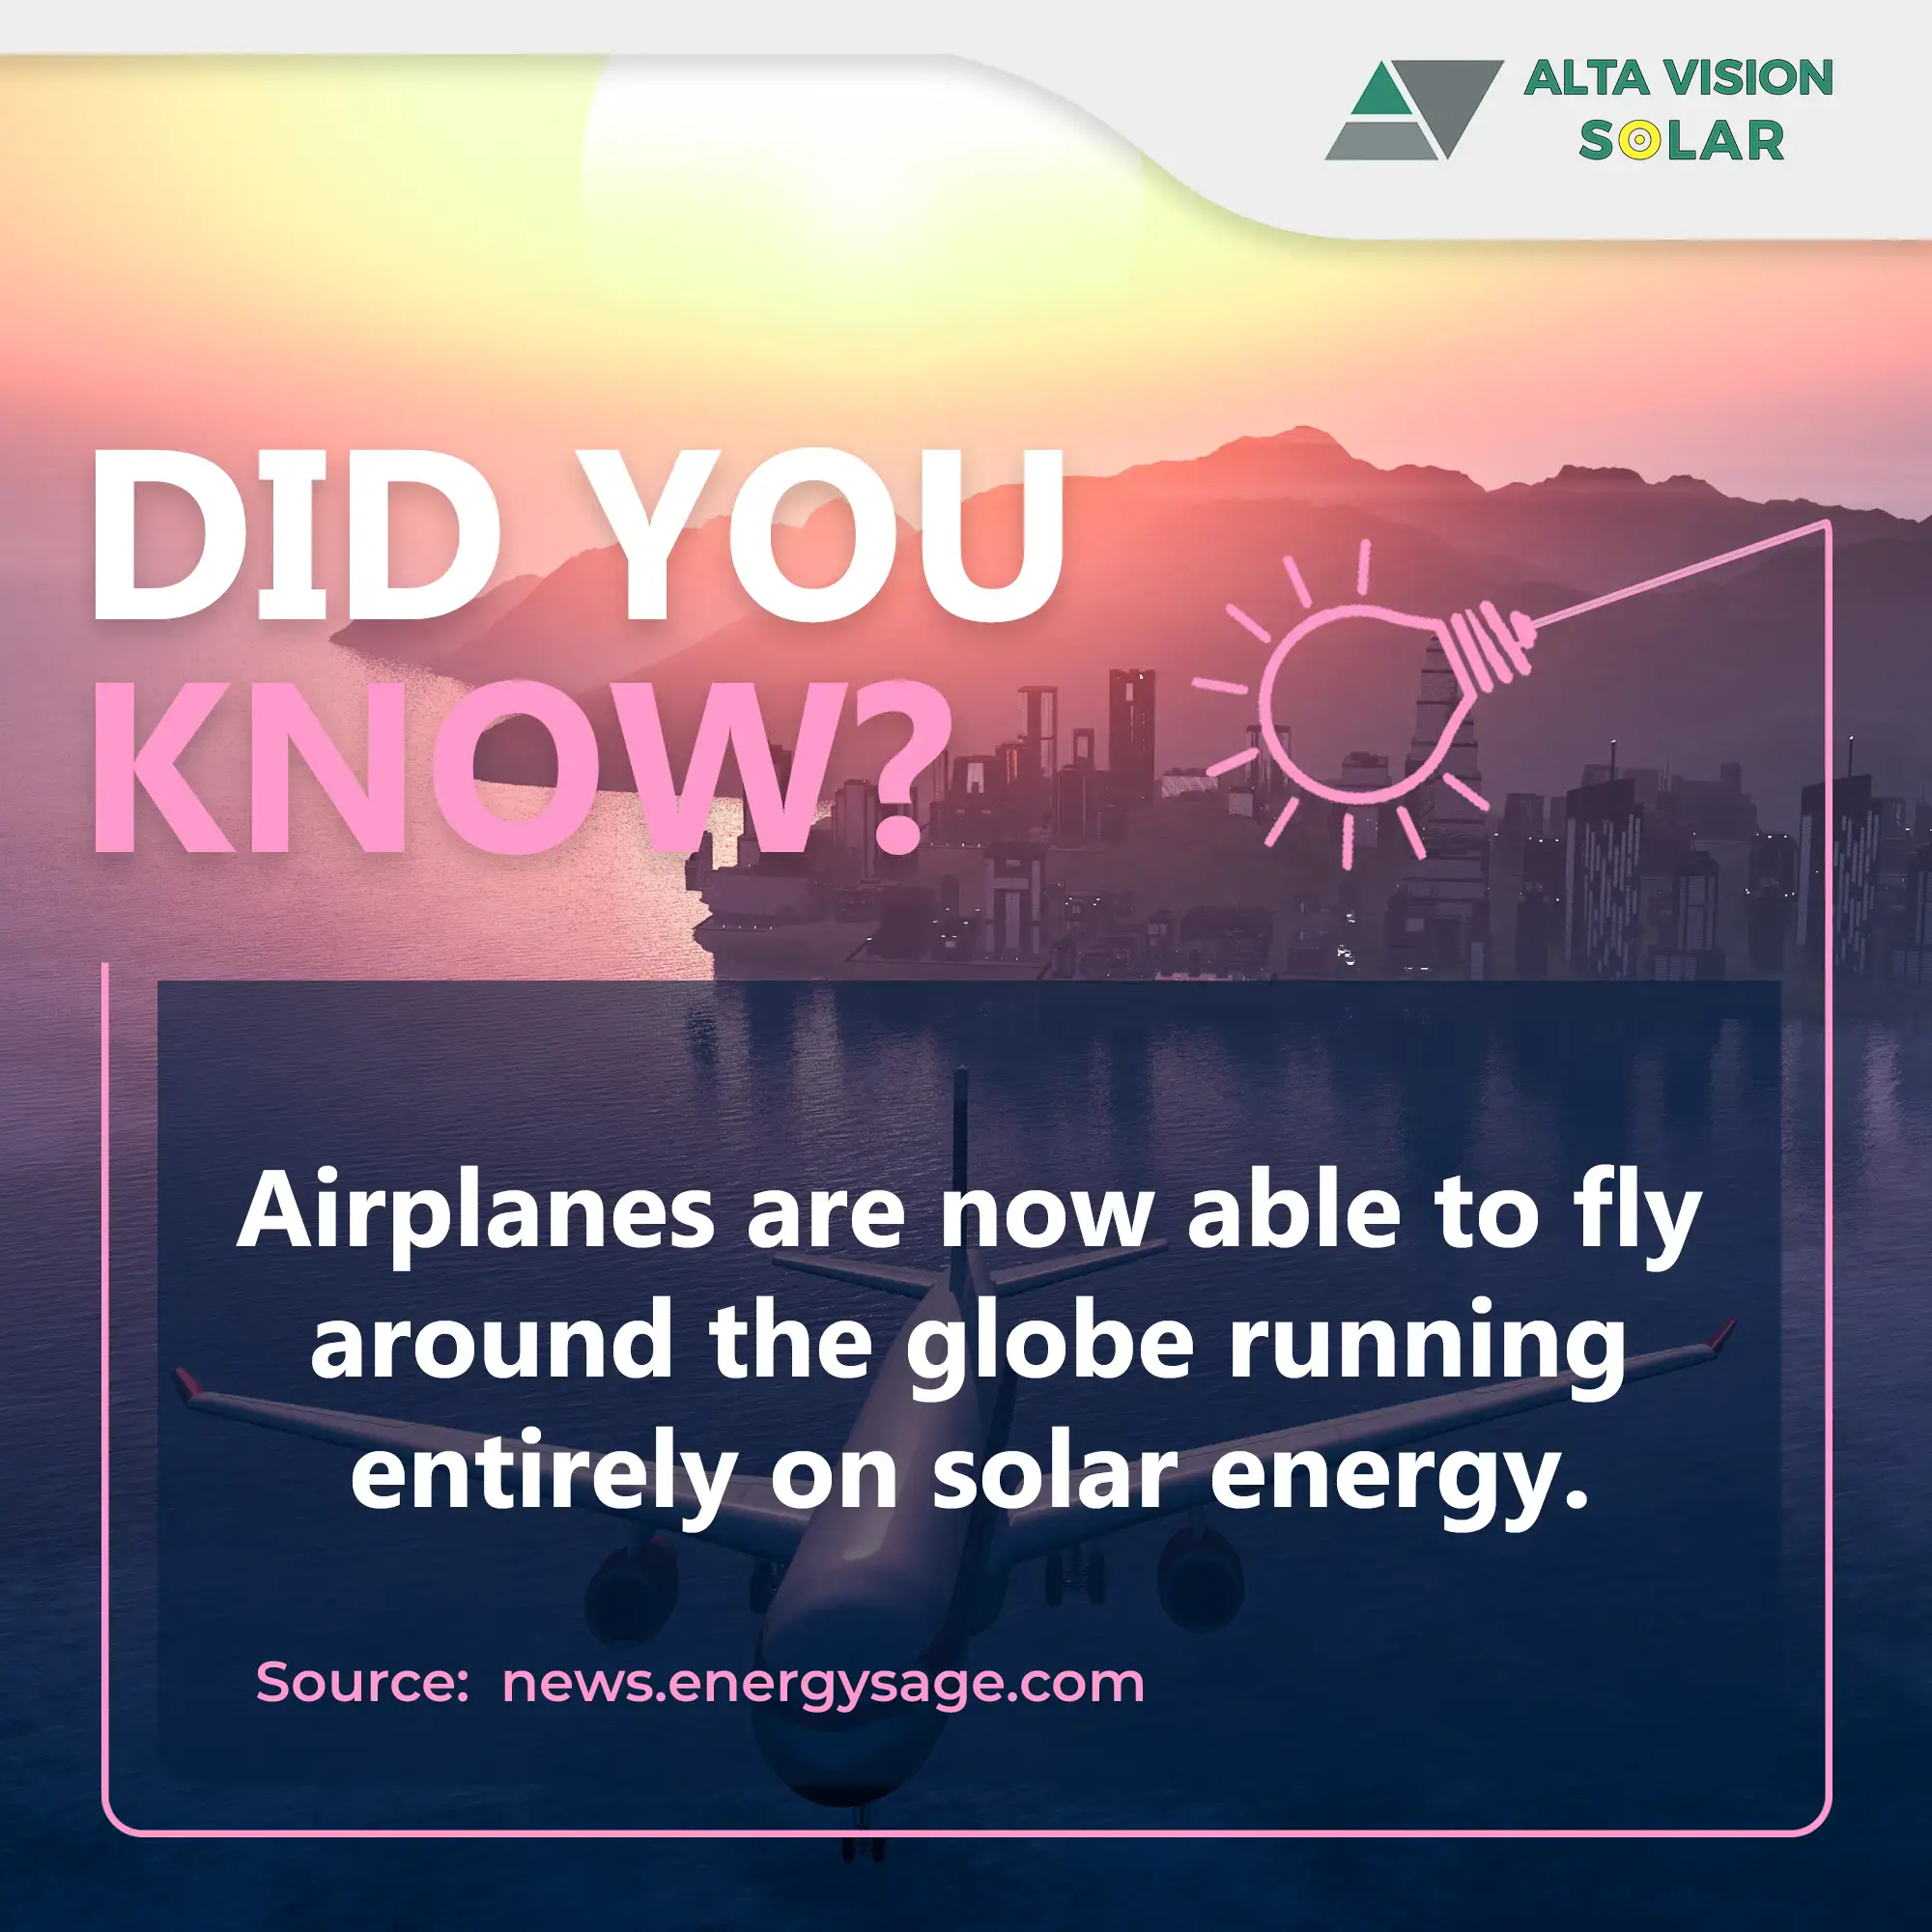 Airplanes are now able to fly around the globe, running entirely on solar energy